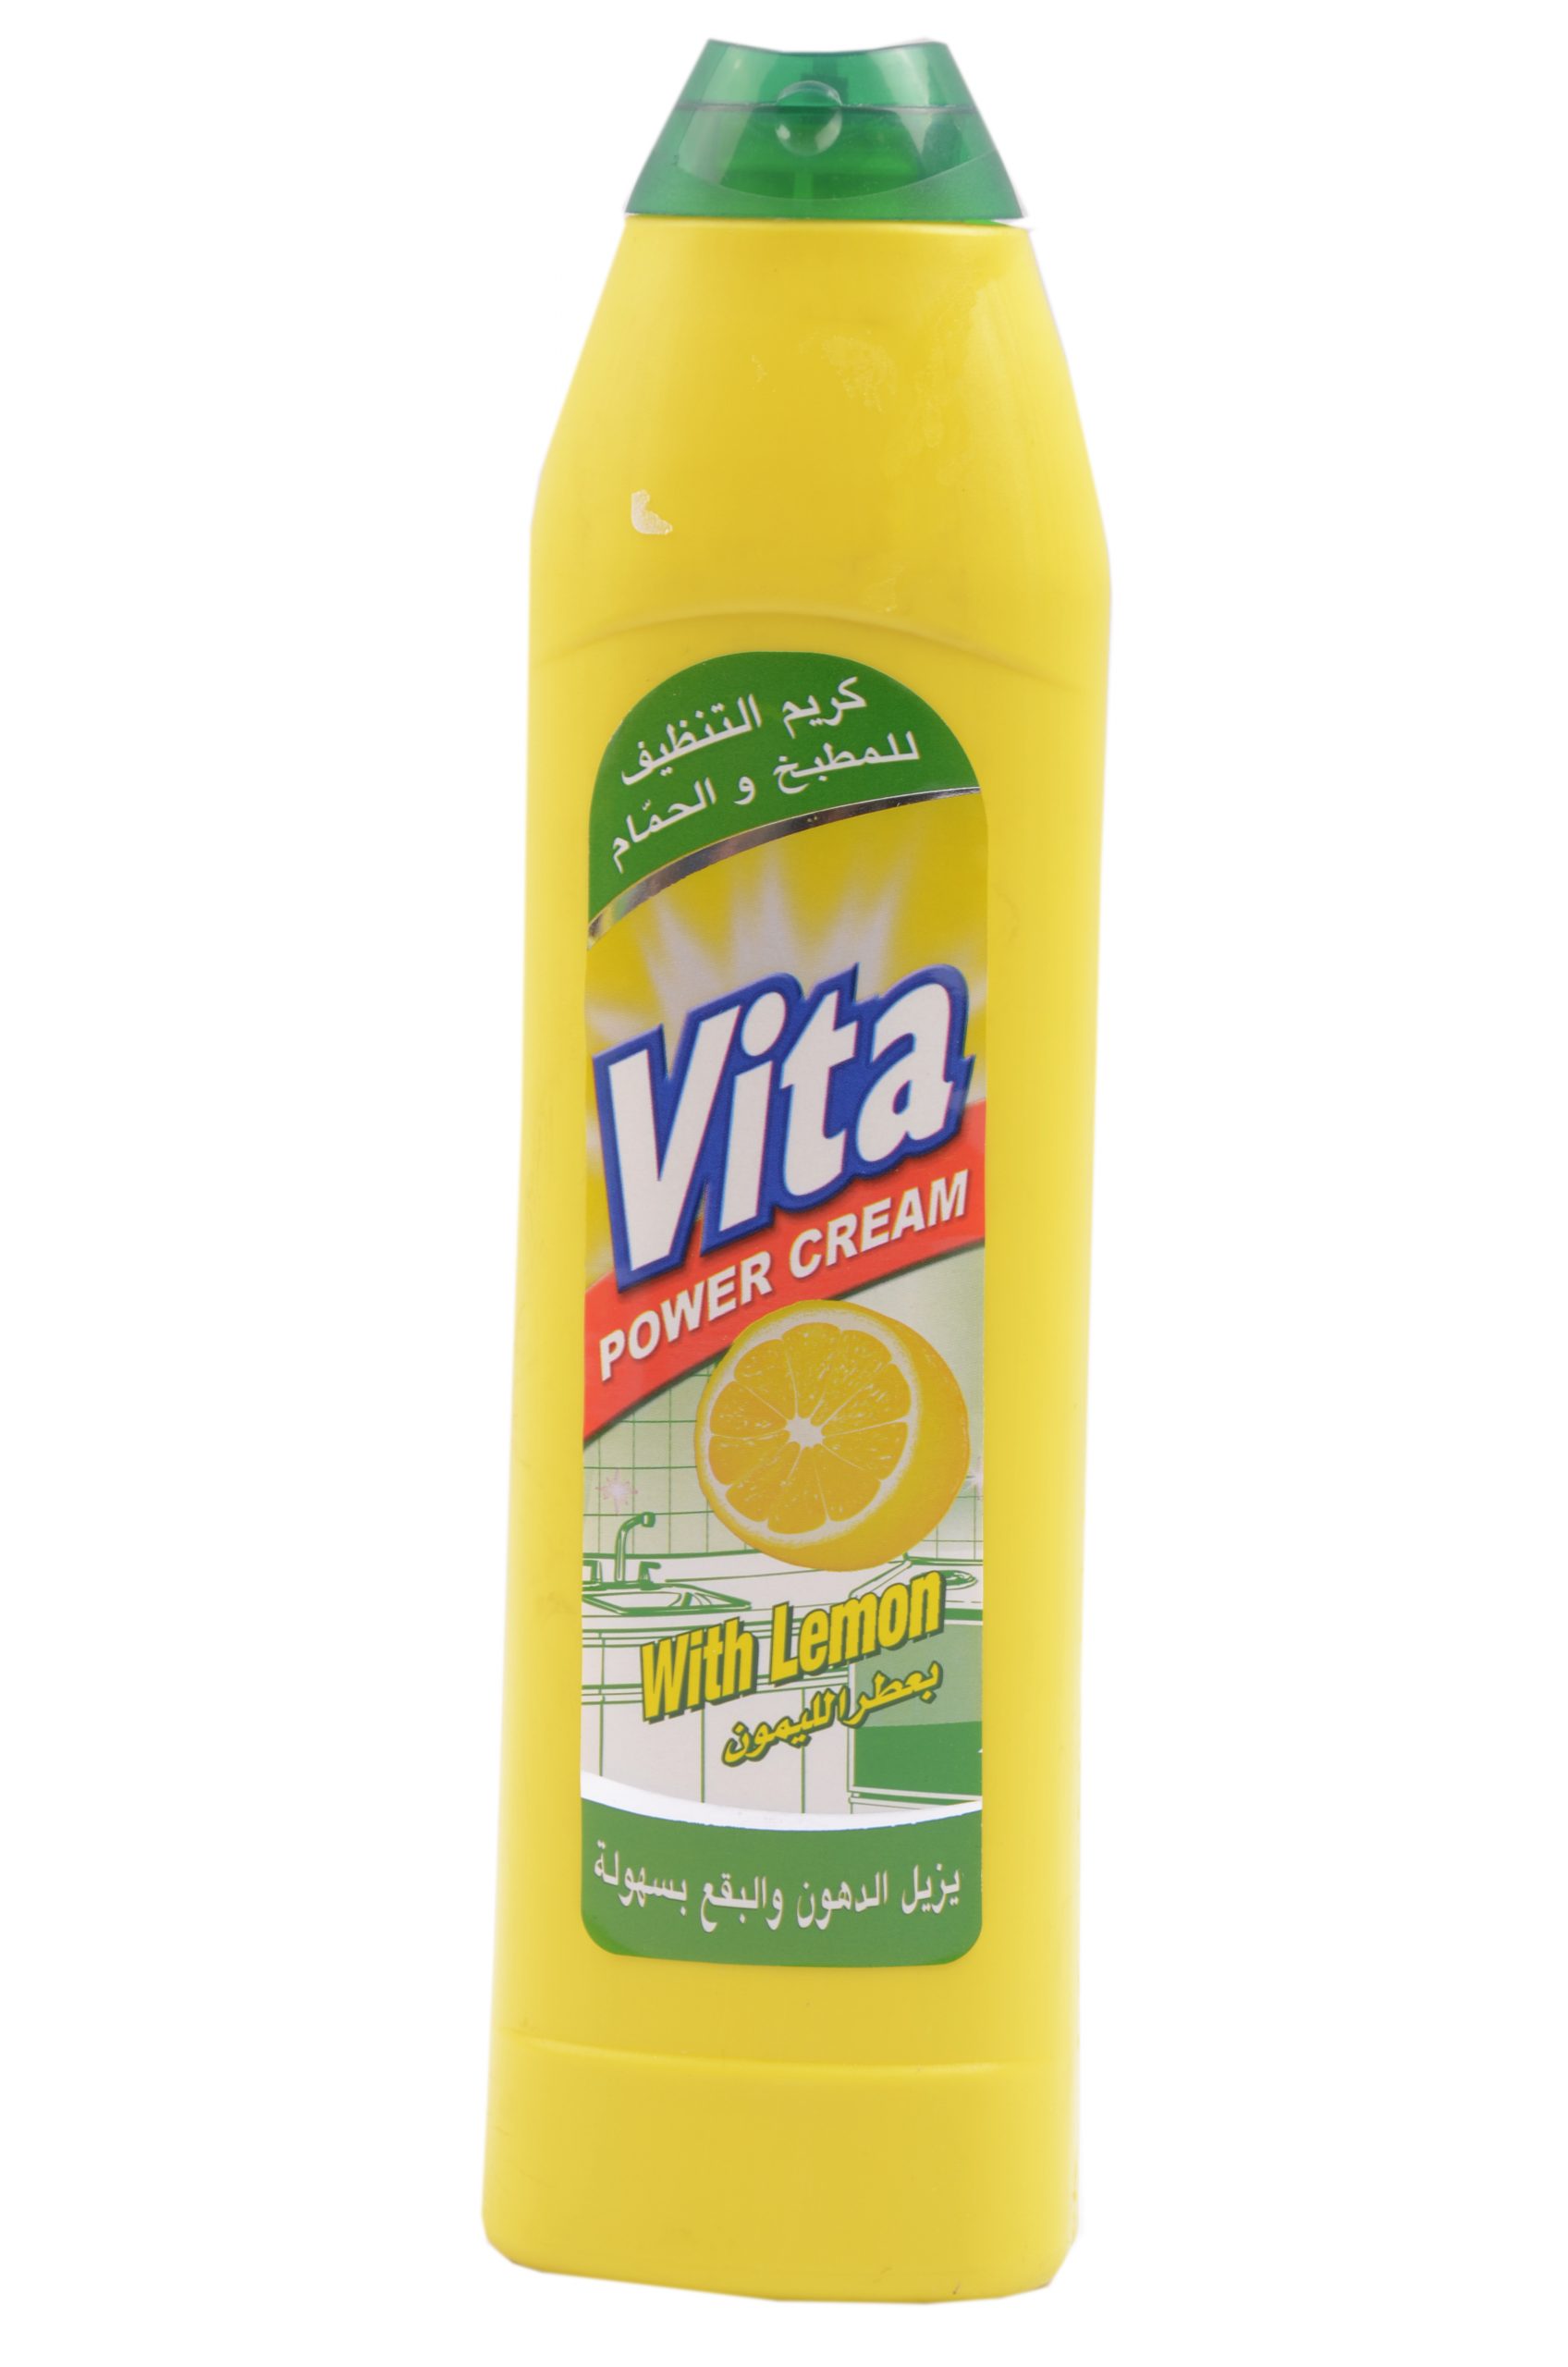 Vita 
	
	Bathroom & Kitchen Cream Cleaner
	 |  Detergents & Cleaners |  Cleaning Materials |  House Ware